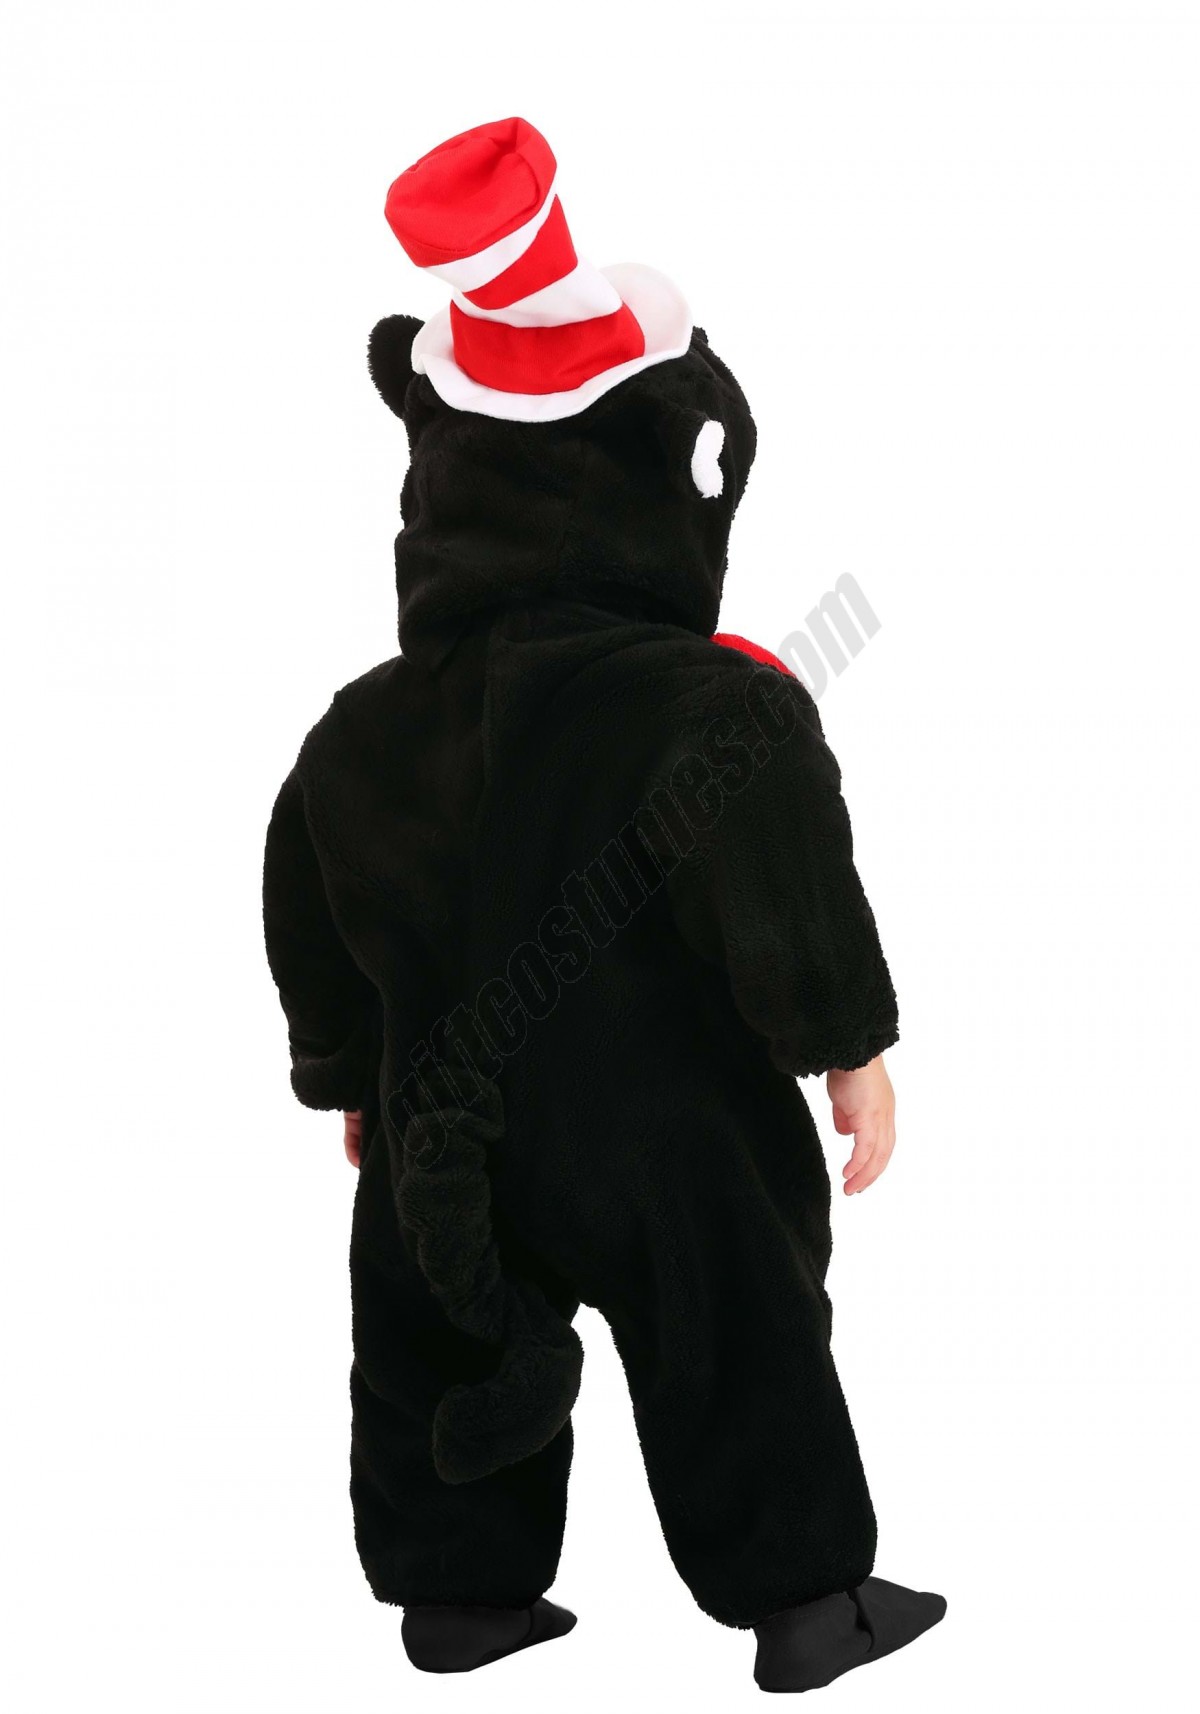 Dr. Seuss: The Cat in the Hat Deluxe Infant Costume Promotions - -1